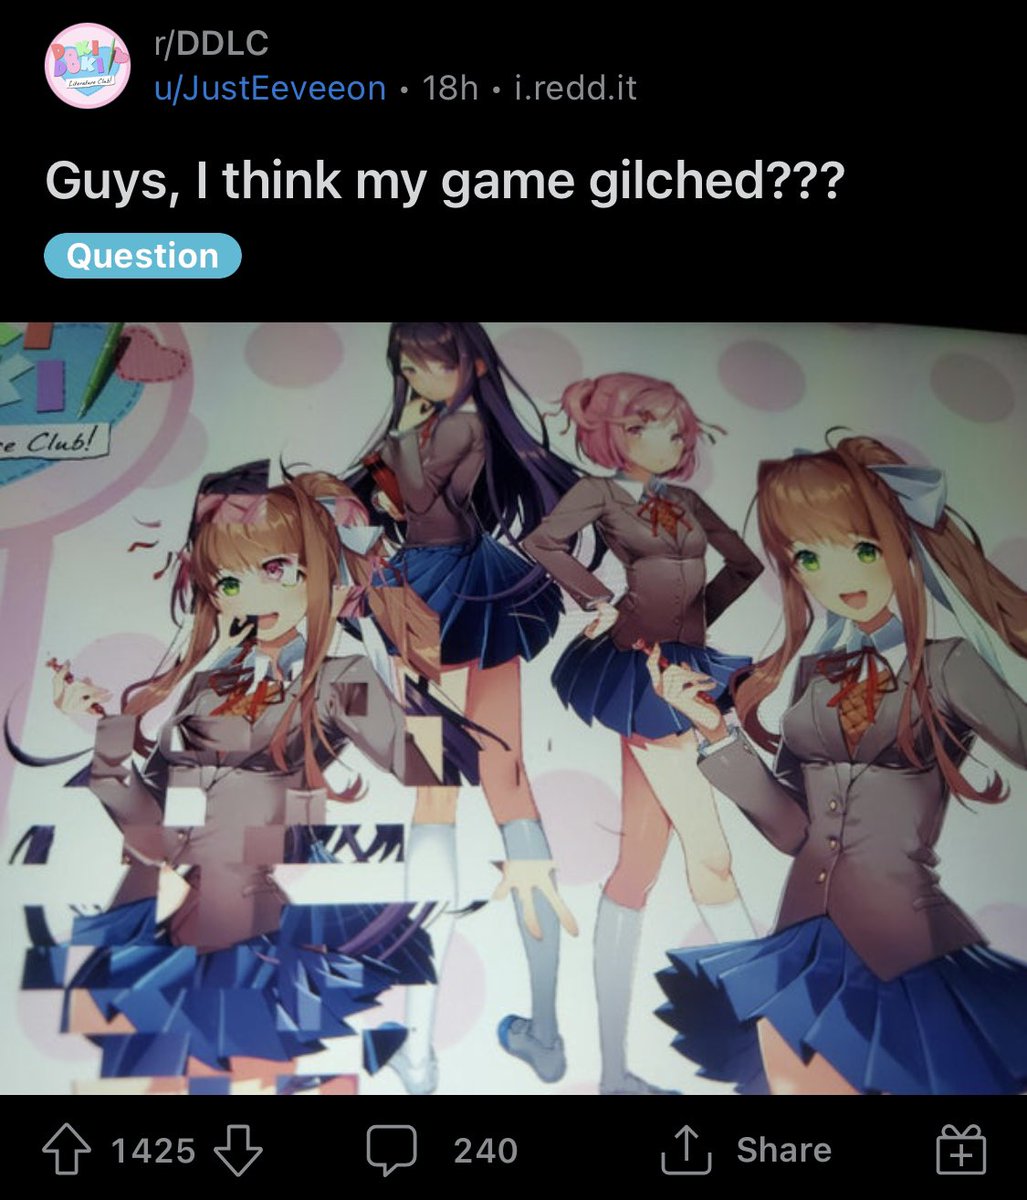 good posts from reddit - doki doki literature club japanese - Peral rDdlc uJustEeveeon 18h i.redd.it Guys, I think my game gilched??? Question 1 e Club! 1425 Wm 240